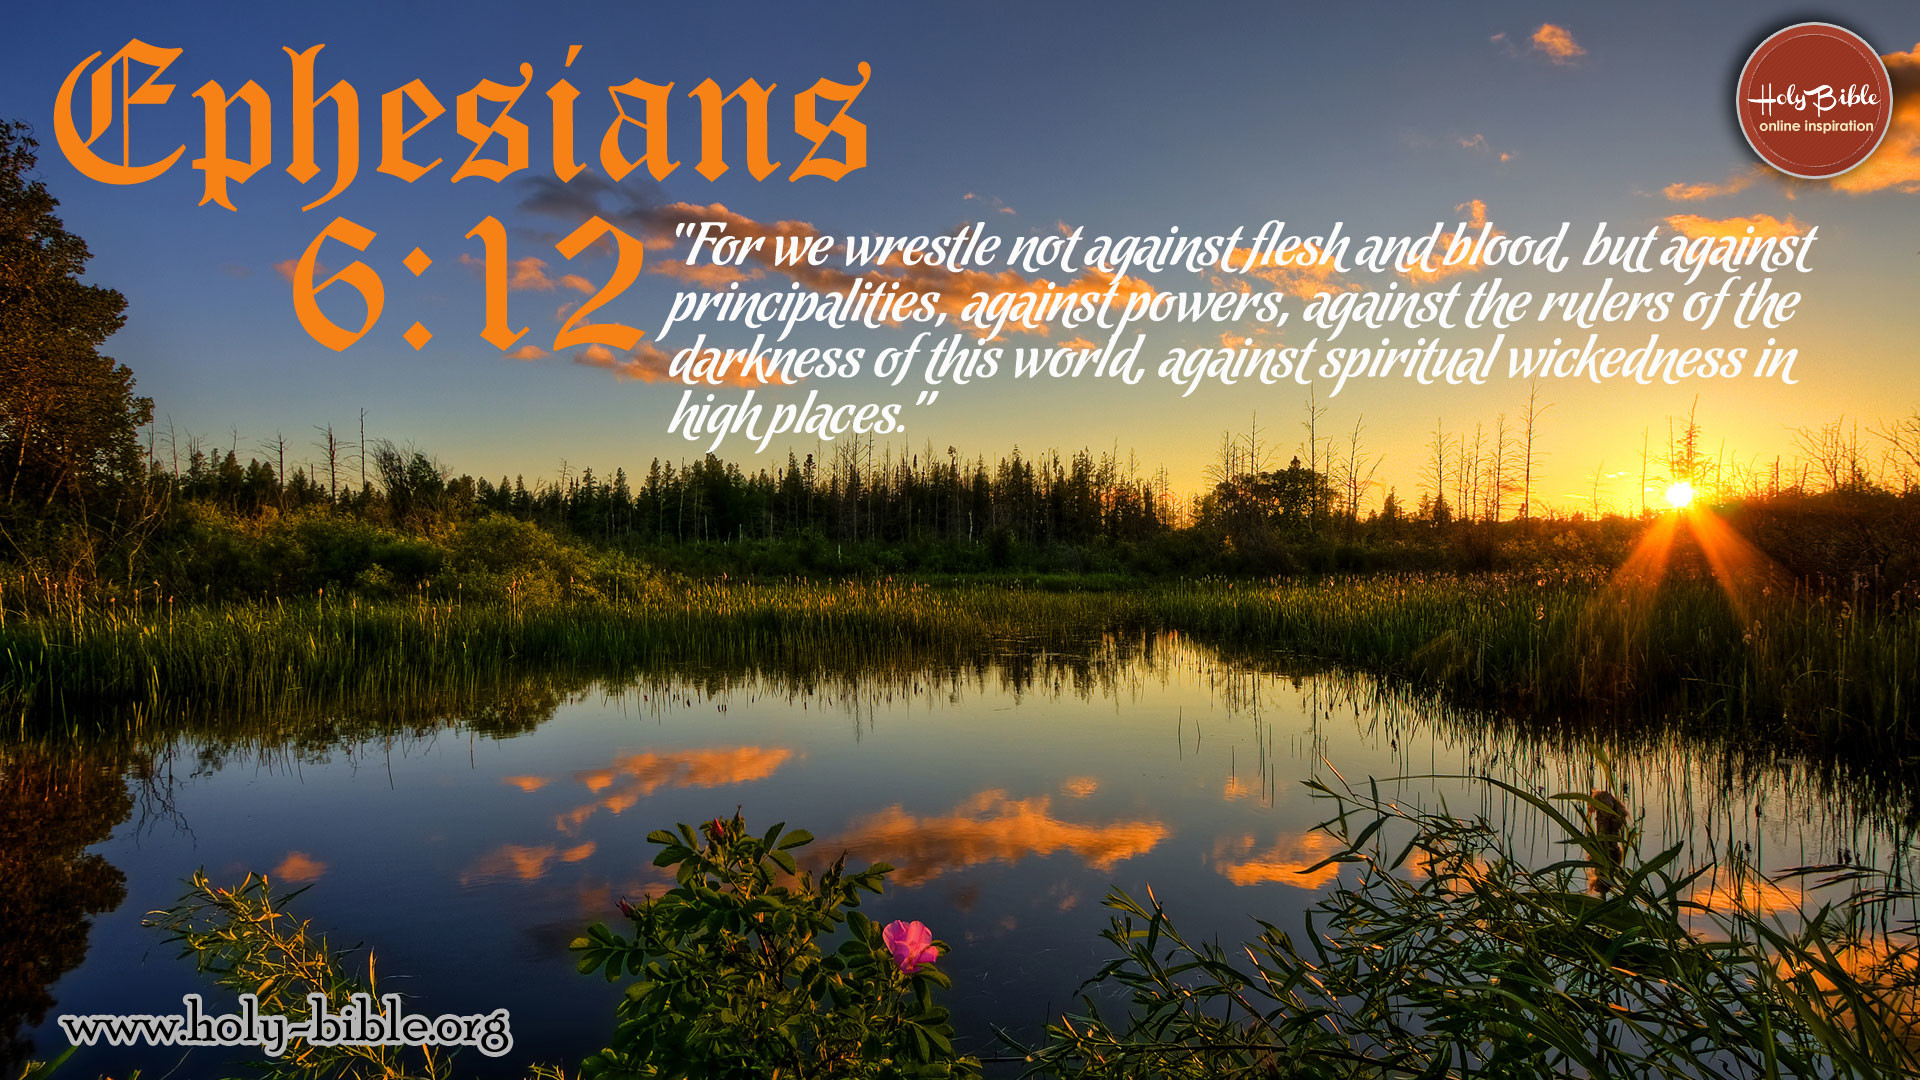 1920x1080 images of bible verses | Bible Verse of the day – Ephesians 6:12